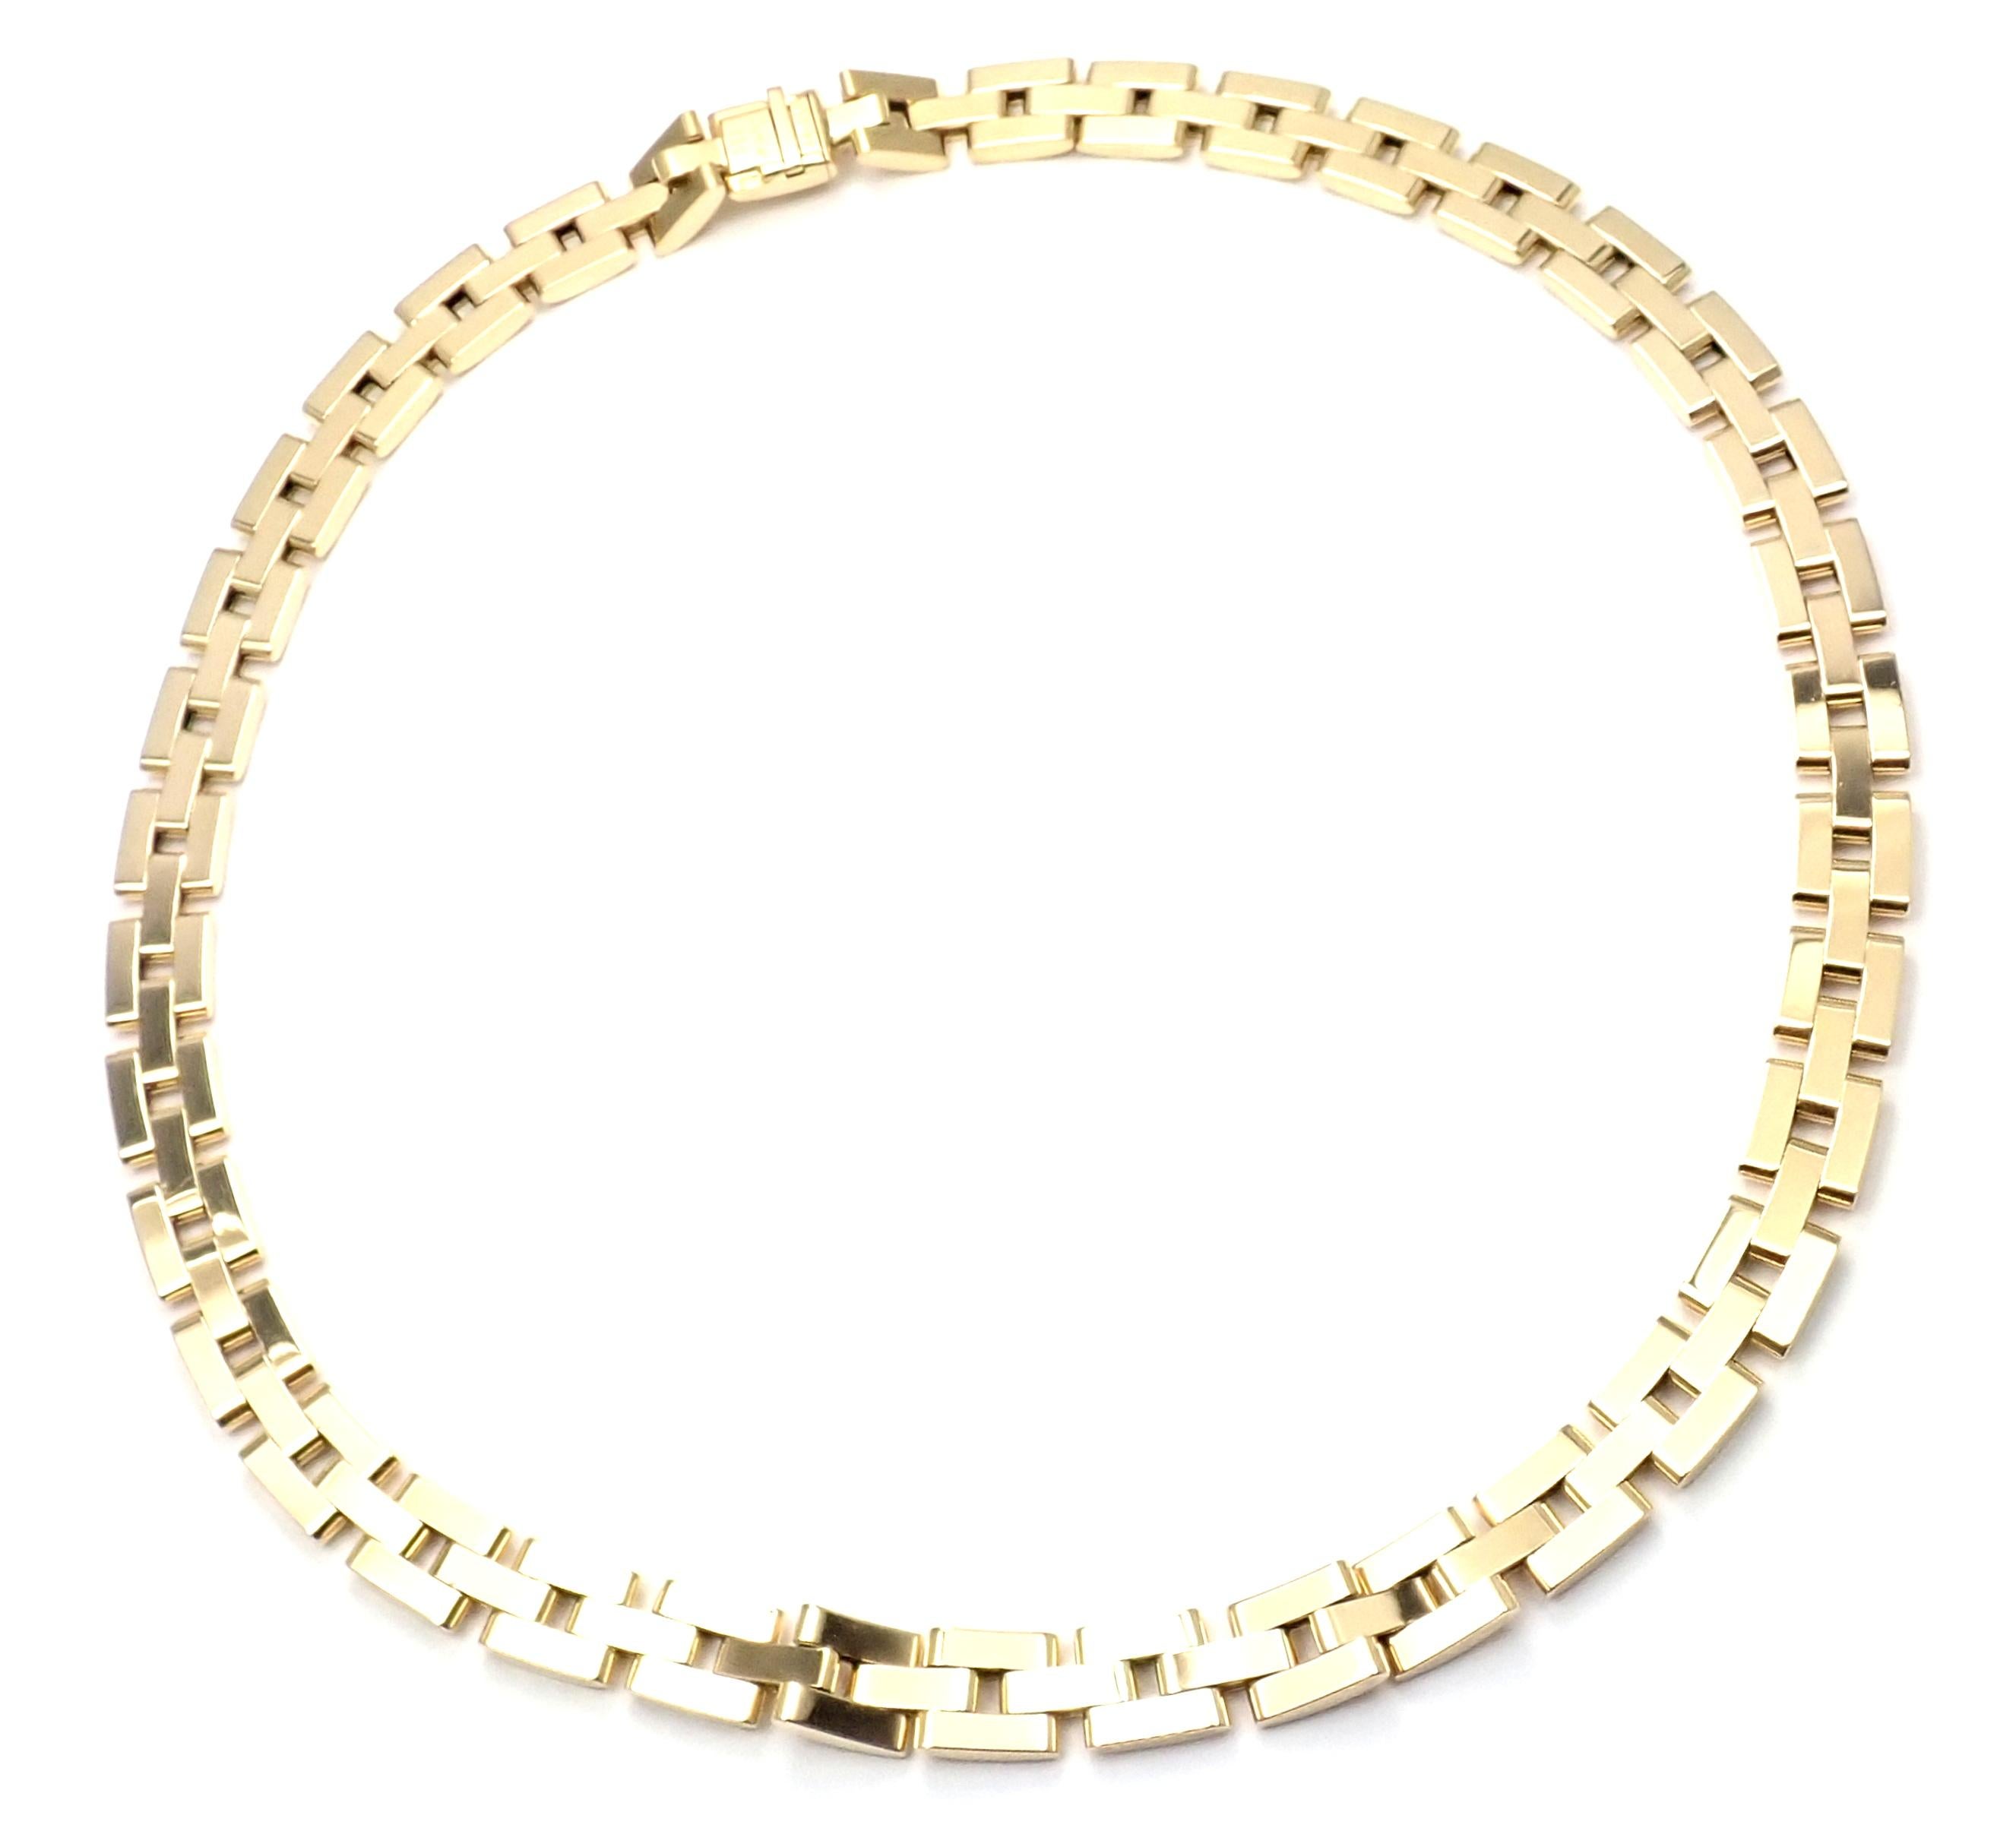 18K Yellow Gold Panthere Panther 3 Row Maillon Necklace by Cartier.  
This necklace comes with its original Cartier box.    
Necklace Details:  
Length: 16